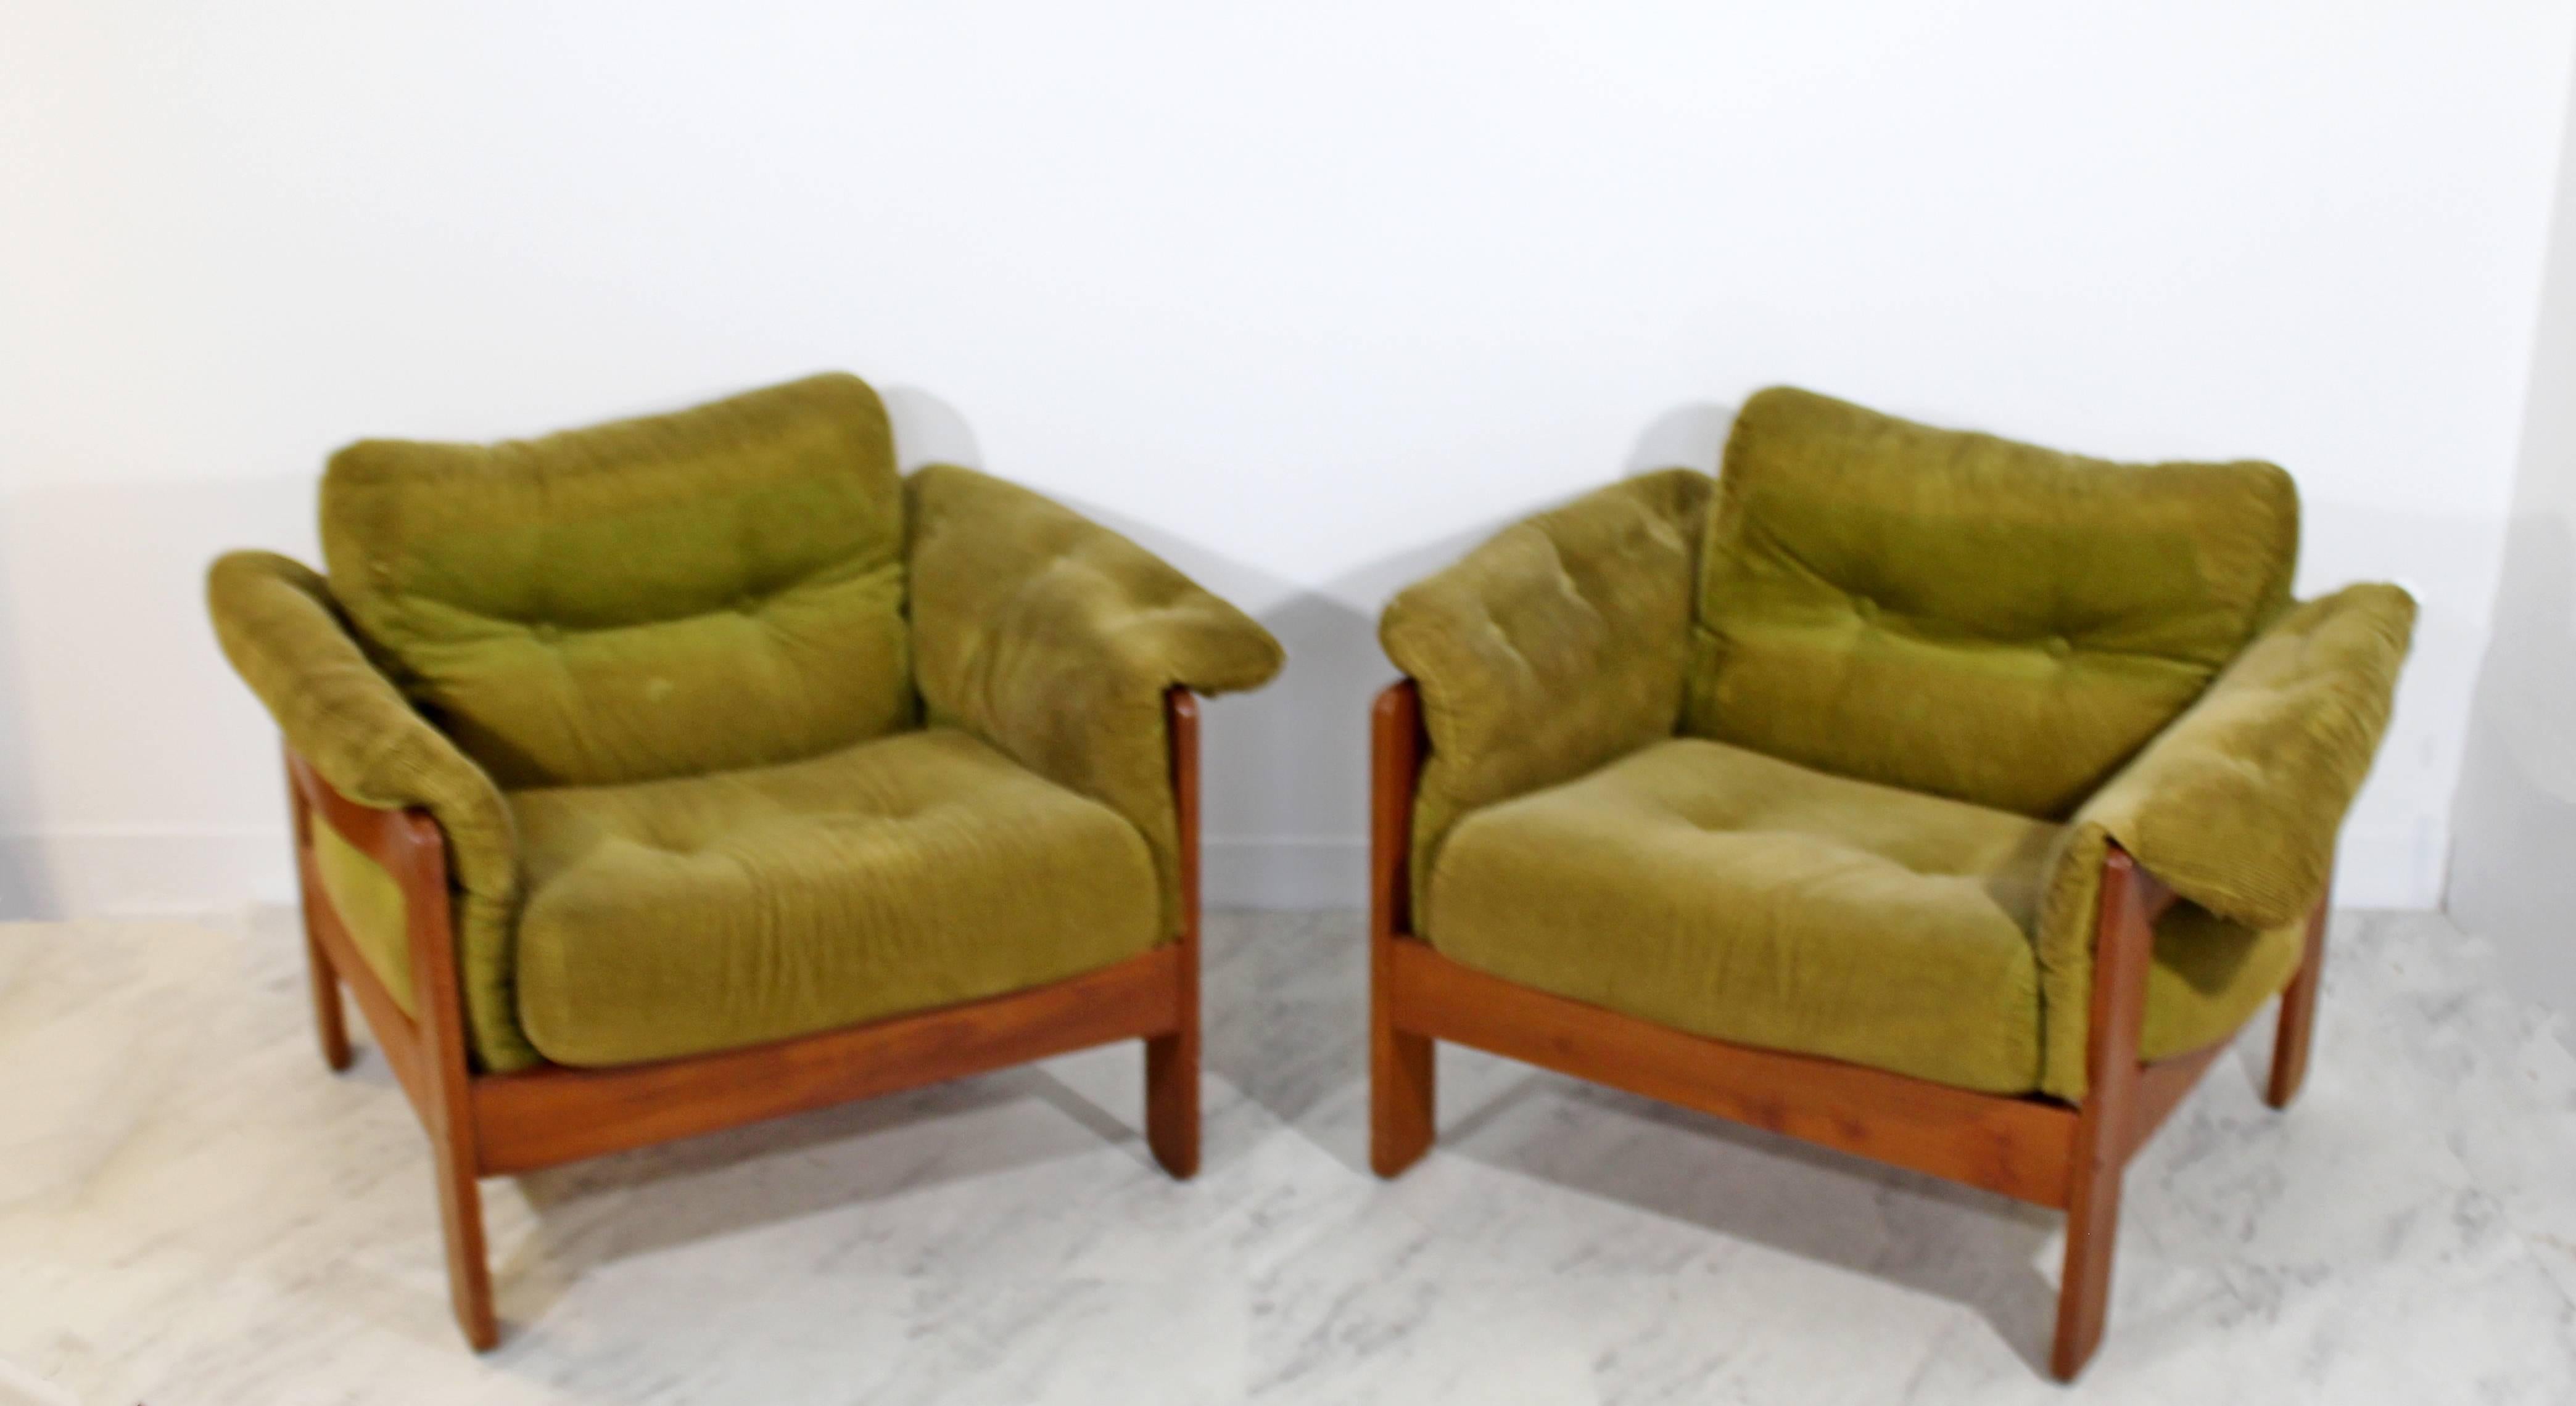 For your consideration is a pair of lounge chairs, on stunning wooden bases, with cushions that snap onto the chair by N. Eilersen control, Denmark, circa 1960s. Bases are in excellent condition, but the cushions need to be reupholstered. The